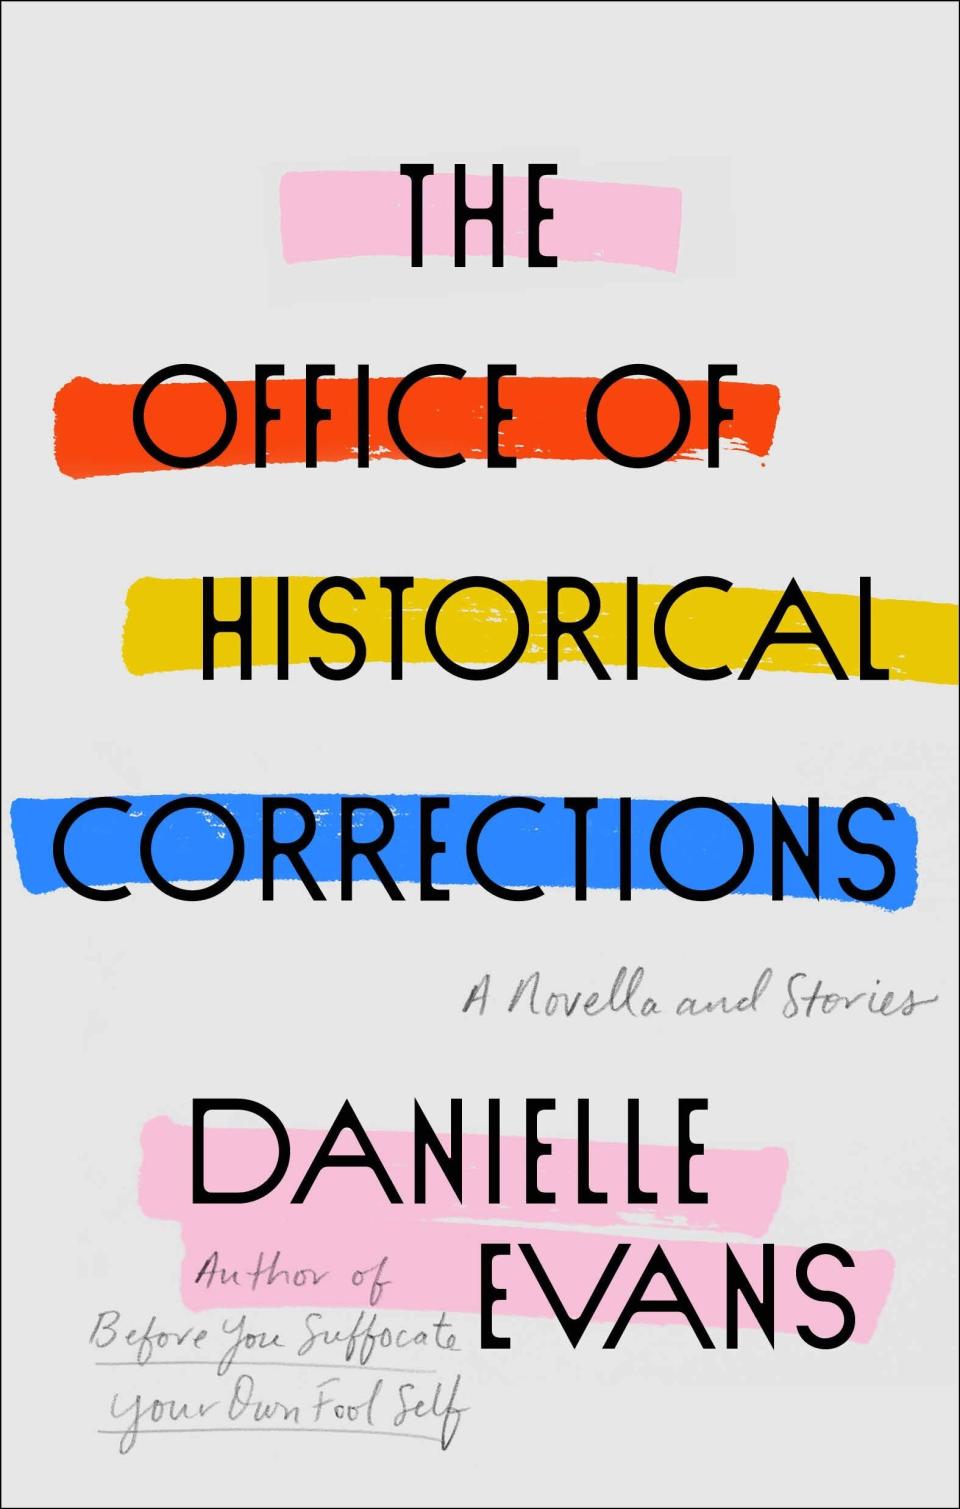 Danielle Evans&rsquo; collection of short fictional stories explores big issues, such as race and culture, through the lens of individual characters at specific moments in their lives. Her diverse cast of characters experience love, lust and grief &mdash; &ldquo;all while exploring how history haunts us, personally and collectively.&rdquo; Read more about it on <a href="https://www.goodreads.com/book/show/51777605-the-office-of-historical-corrections" target="_blank" rel="noopener noreferrer">Goodreads</a>, and grab a copy on <a href="https://amzn.to/3n44MeV" target="_blank" rel="noopener noreferrer">Amazon</a> or <a href="https://fave.co/2U294qE" target="_blank" rel="noopener noreferrer">Bookshop</a>.<br /><br /><i>Expected release date:</i> <i>Nov. 10</i>